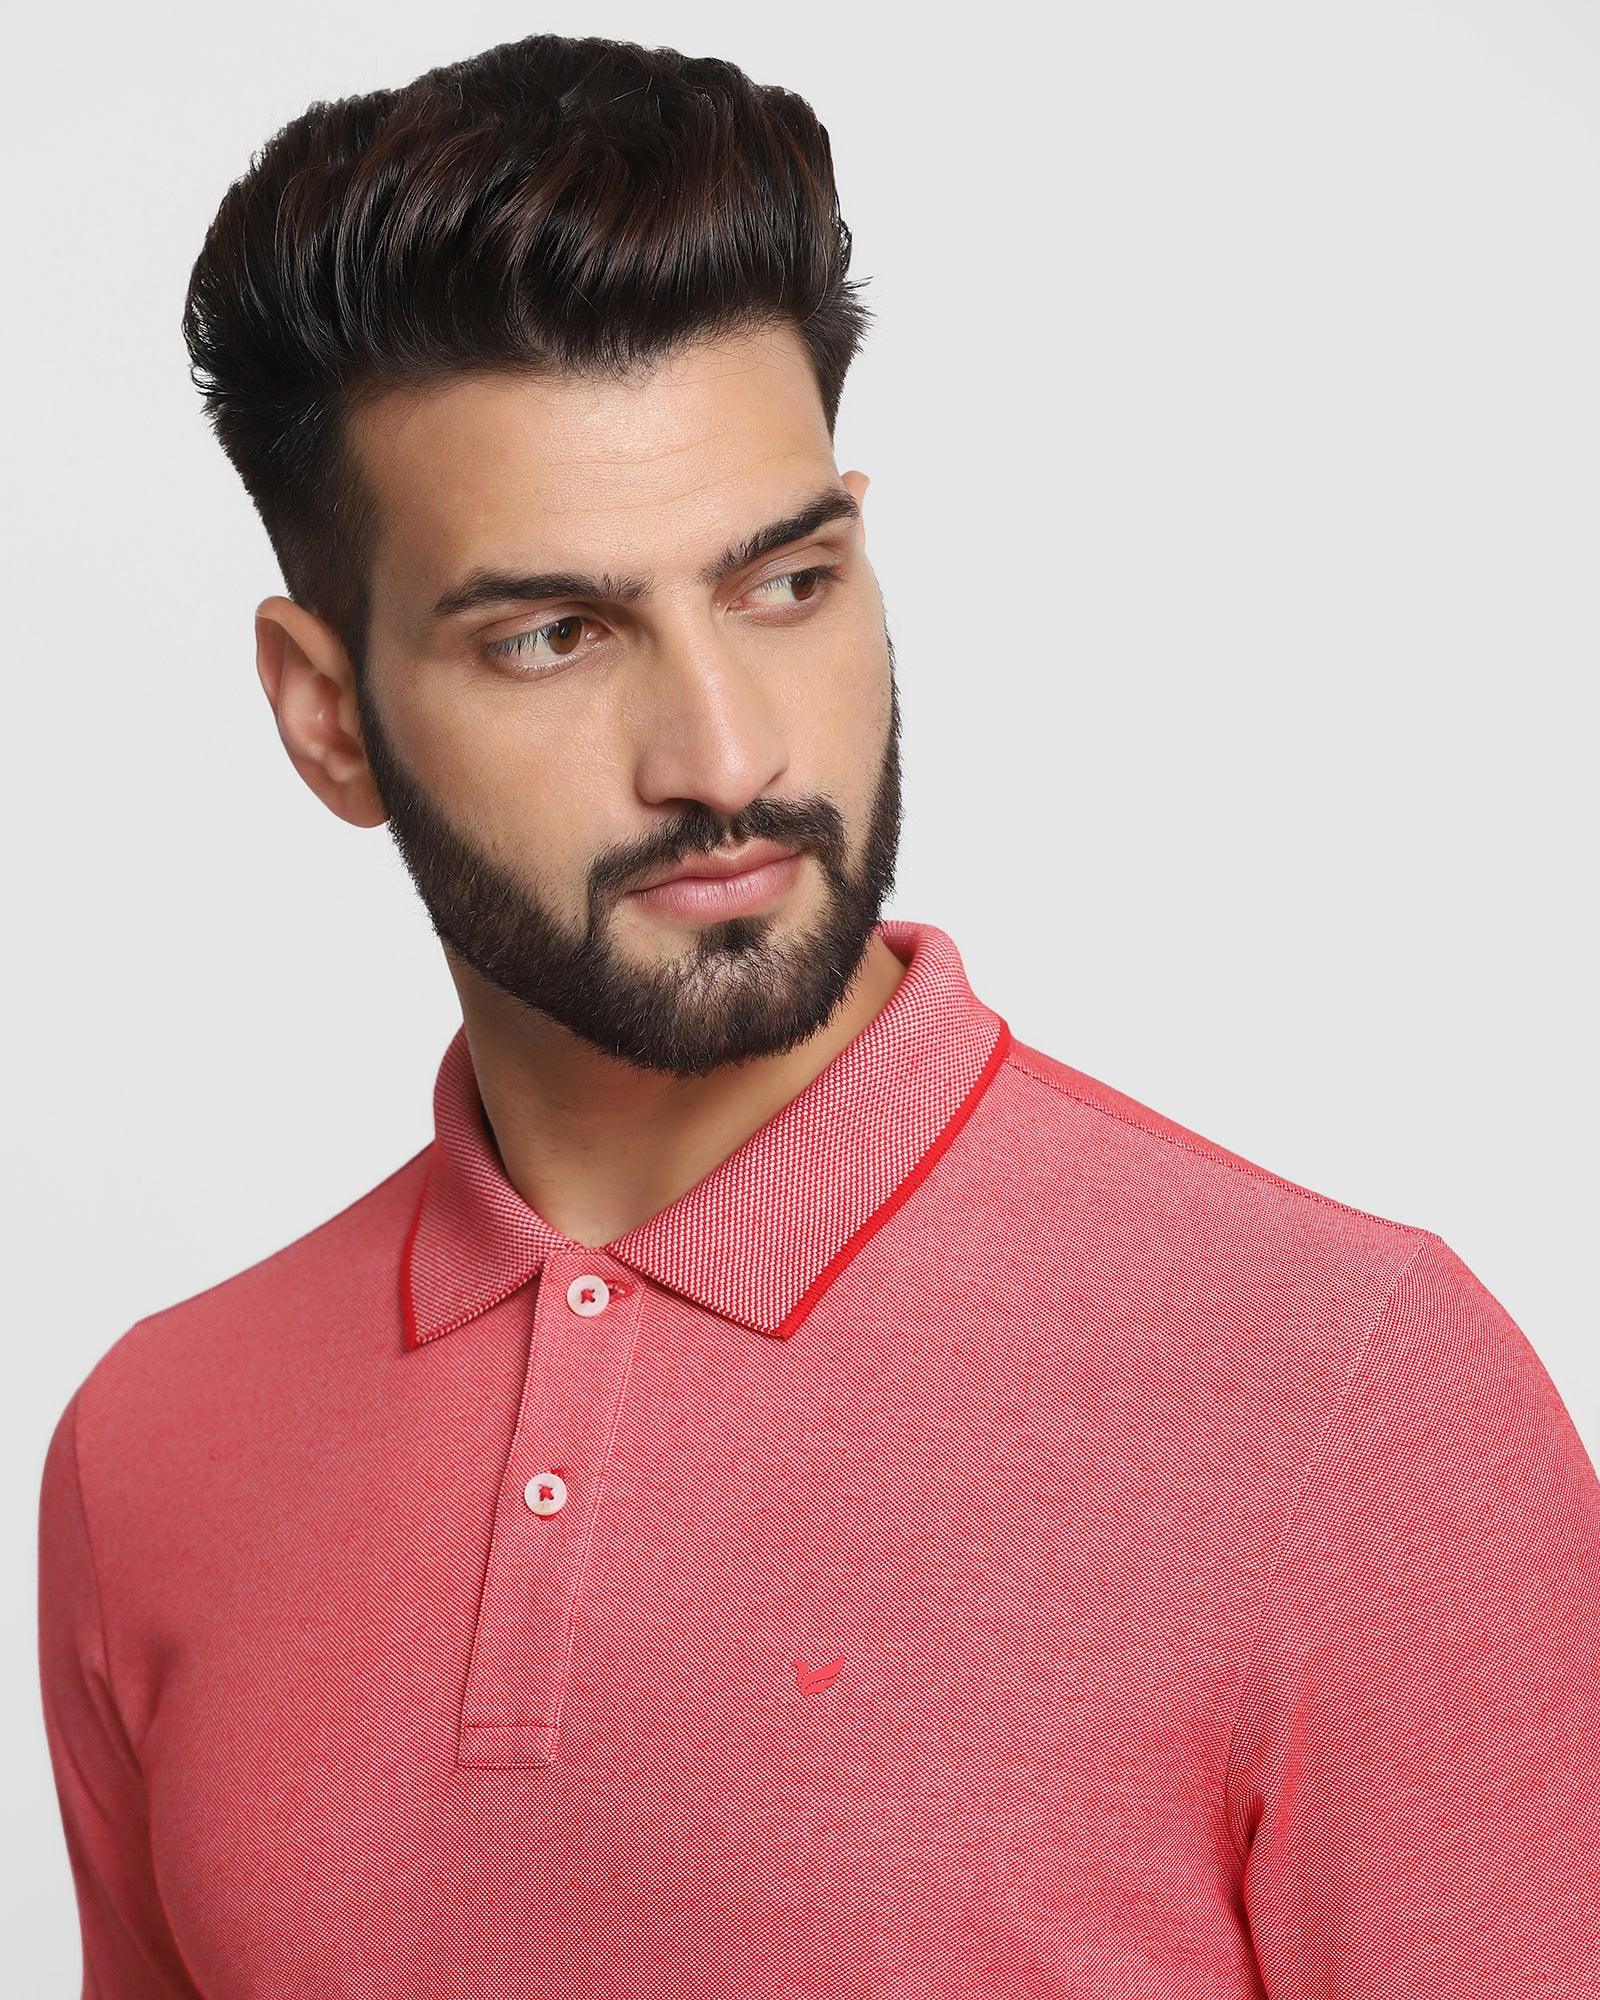 Polo Red Textured T Shirt - Penny